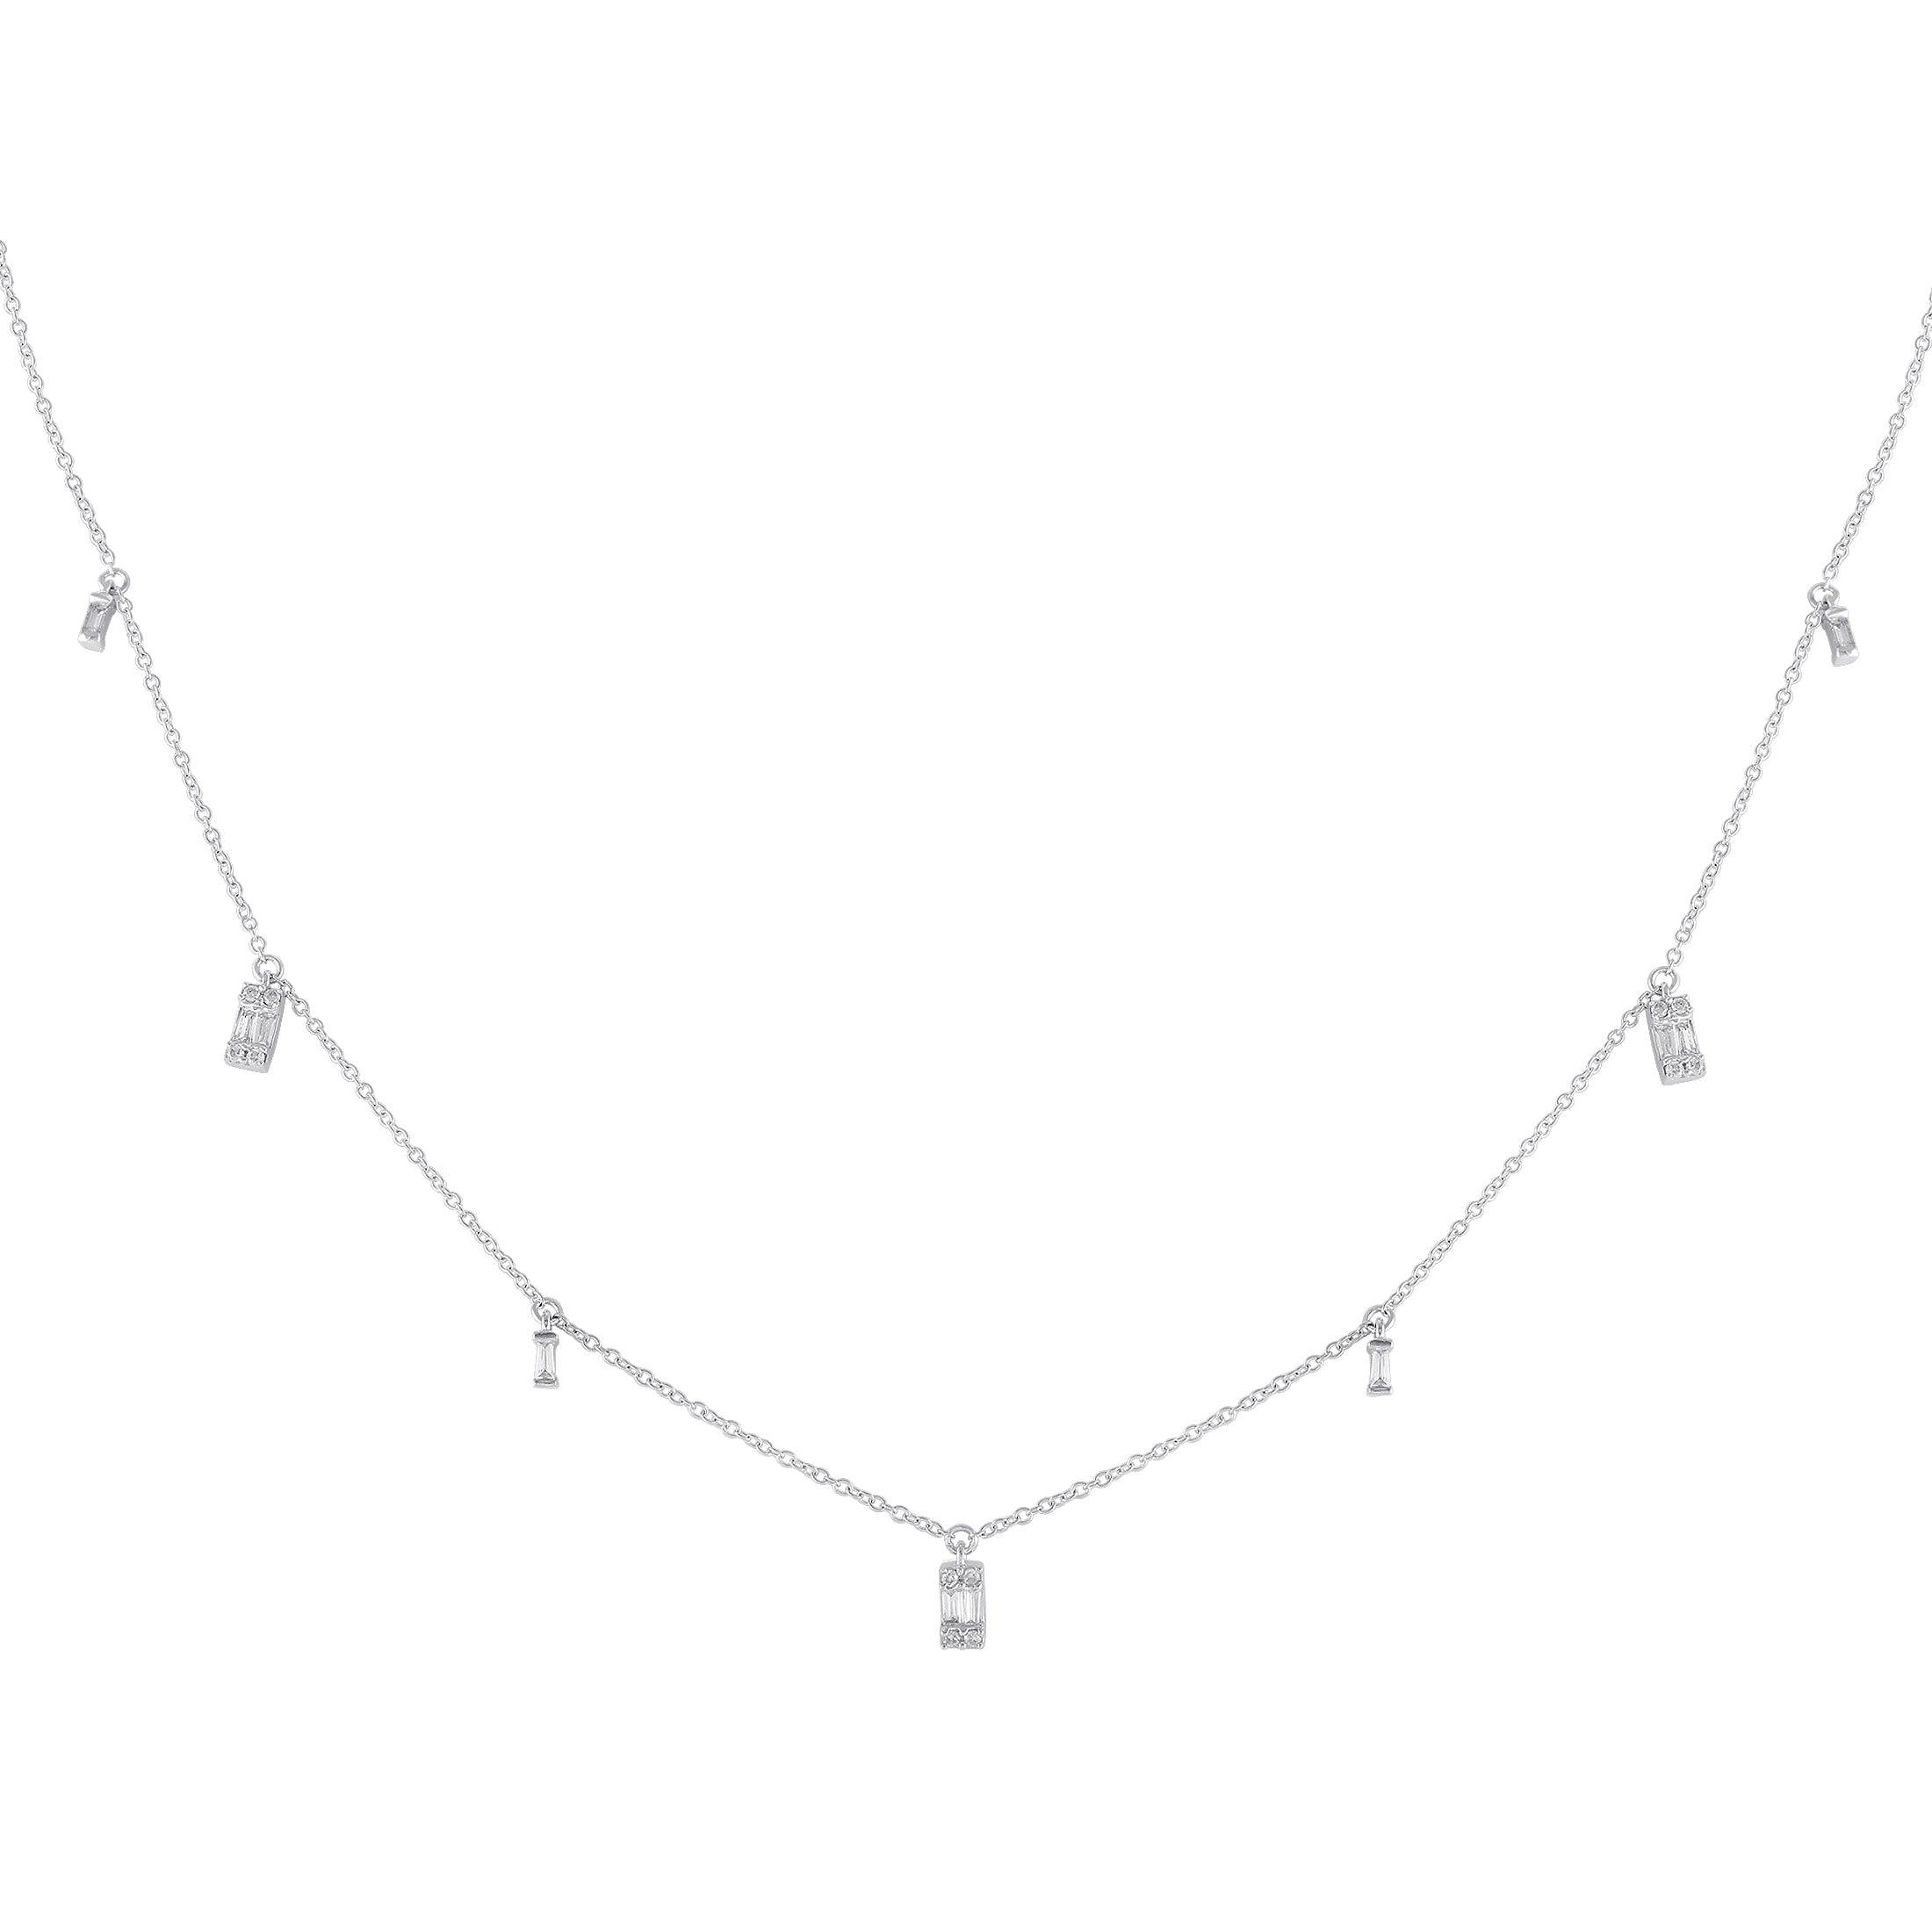 LB Exclusive 14K White Gold 0.25ct Diamond Station Necklace PN14847-W by NON BRANDED